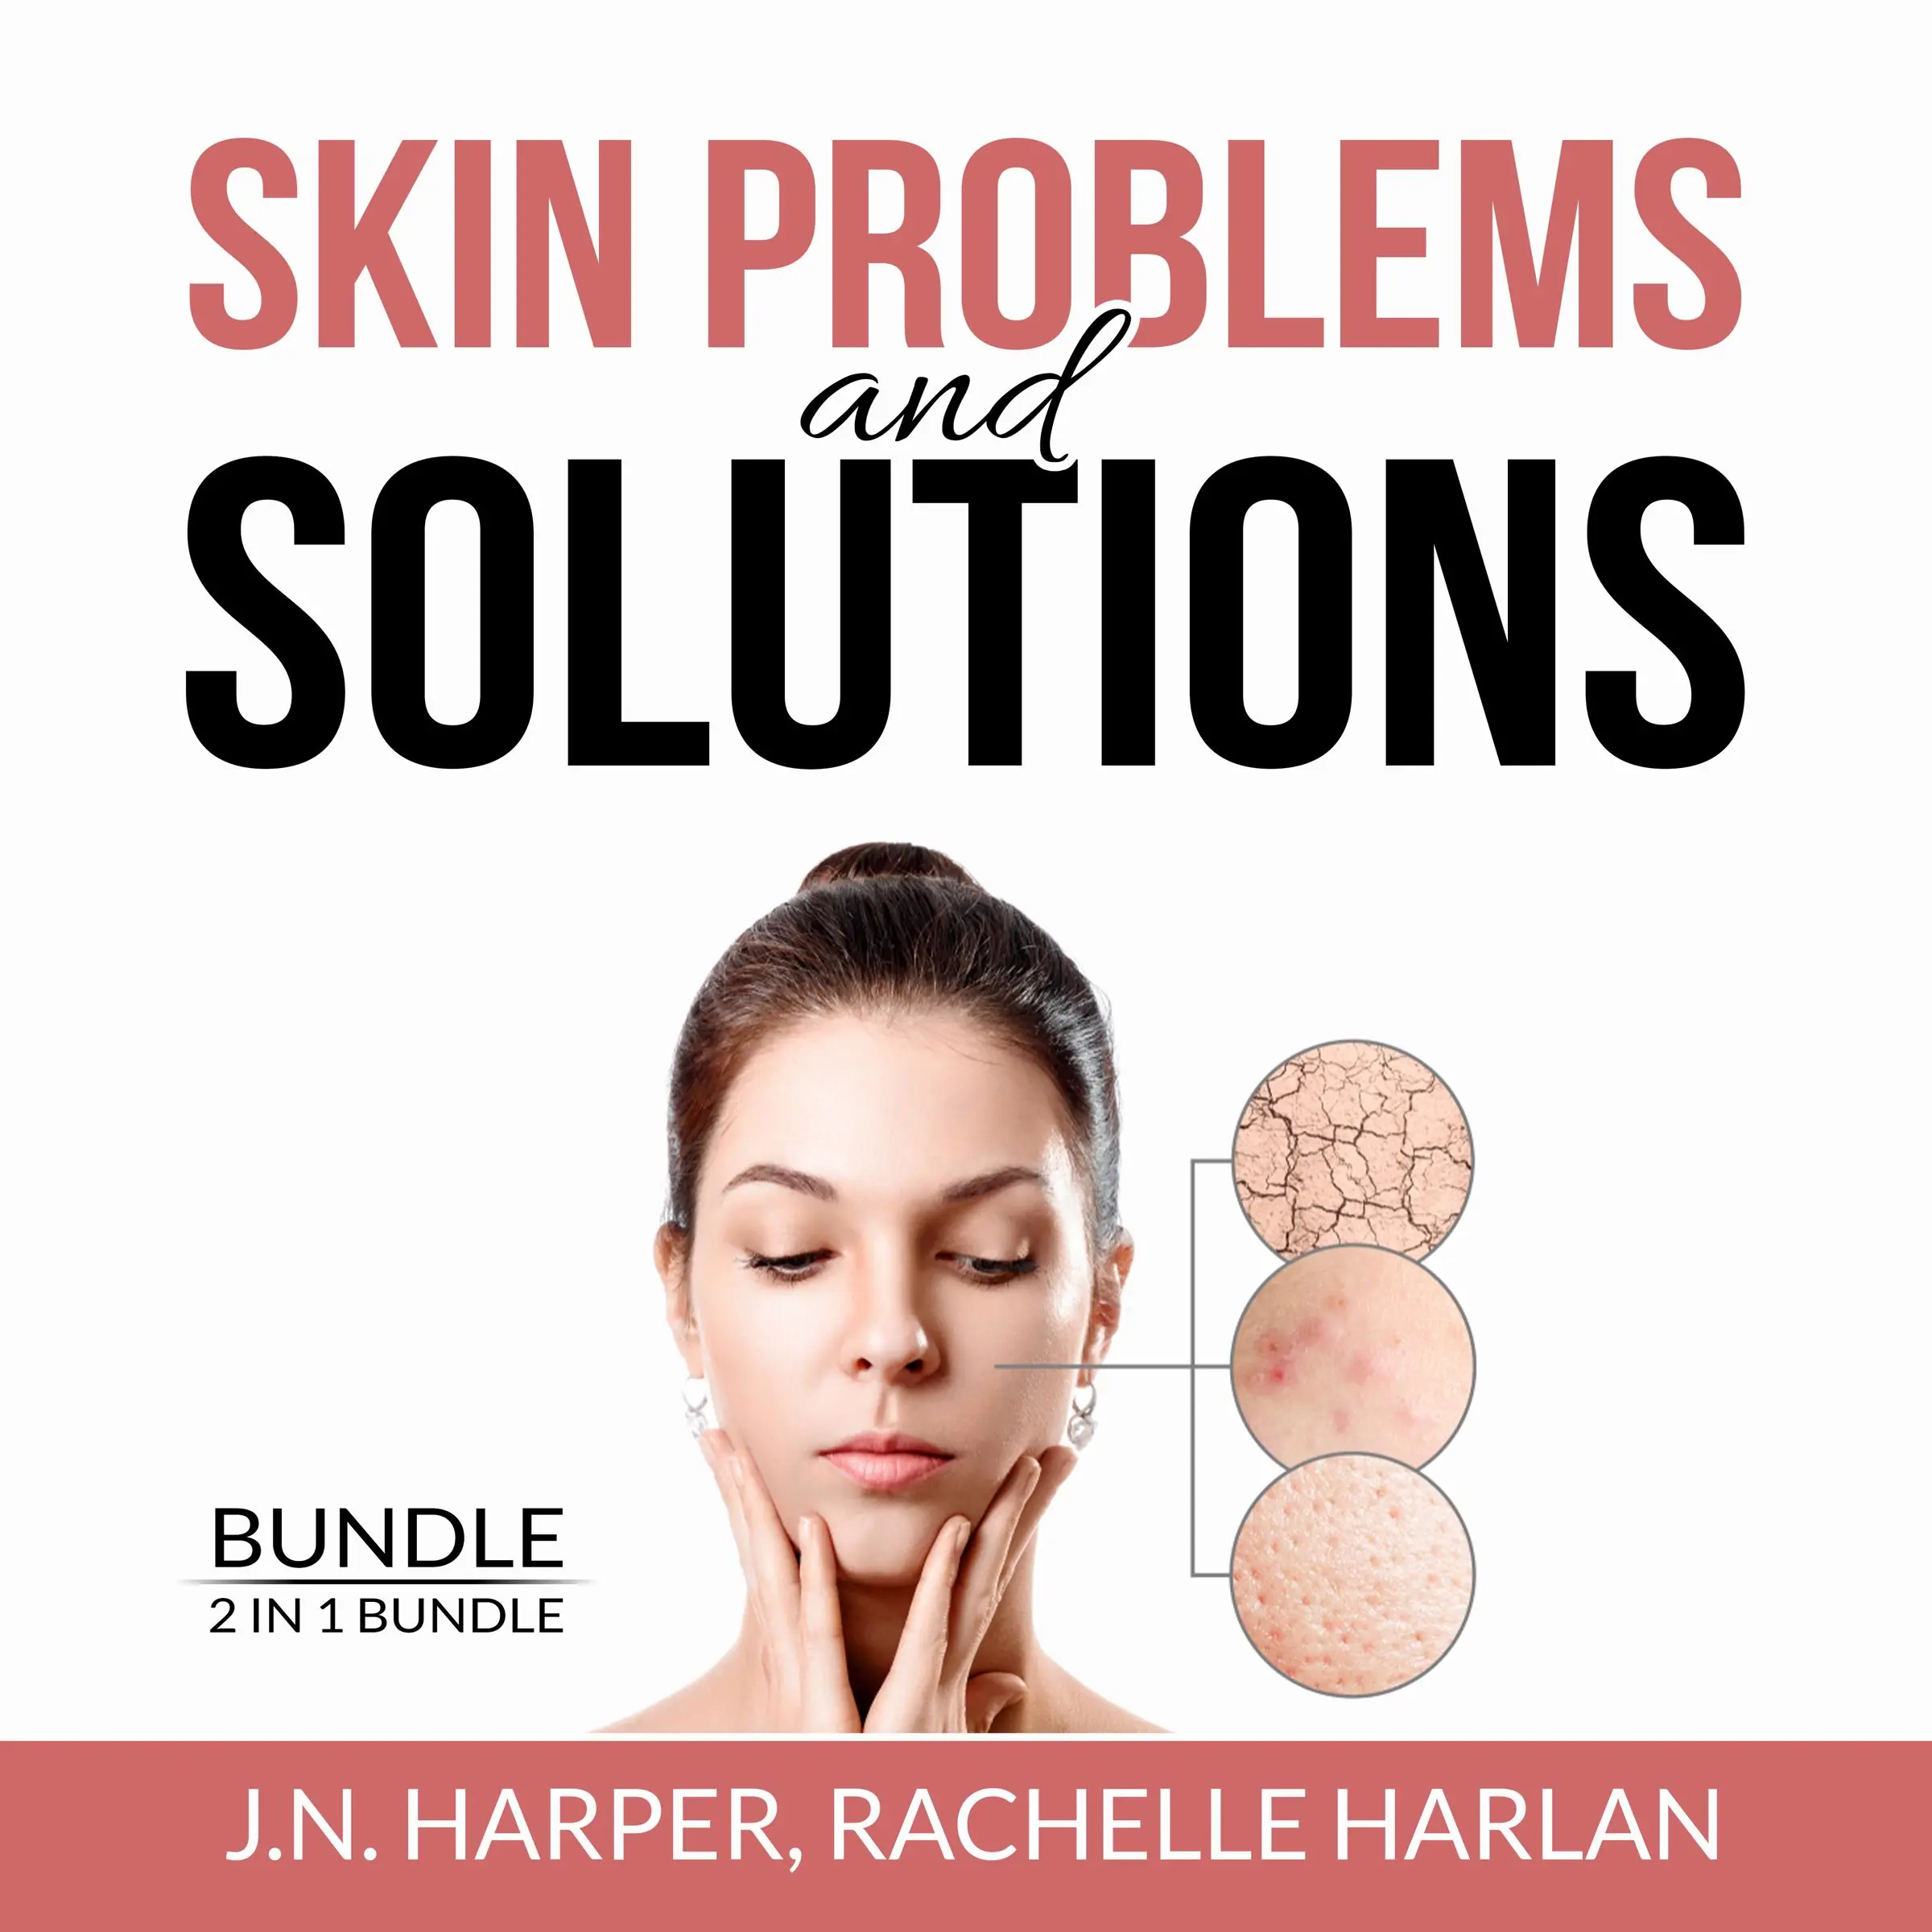 Skin Problems and Solutions Bundle: 2 in 1 Bundle, Eczema Detox and Healing Psoriasis Audiobook by and Rachelle Harlan